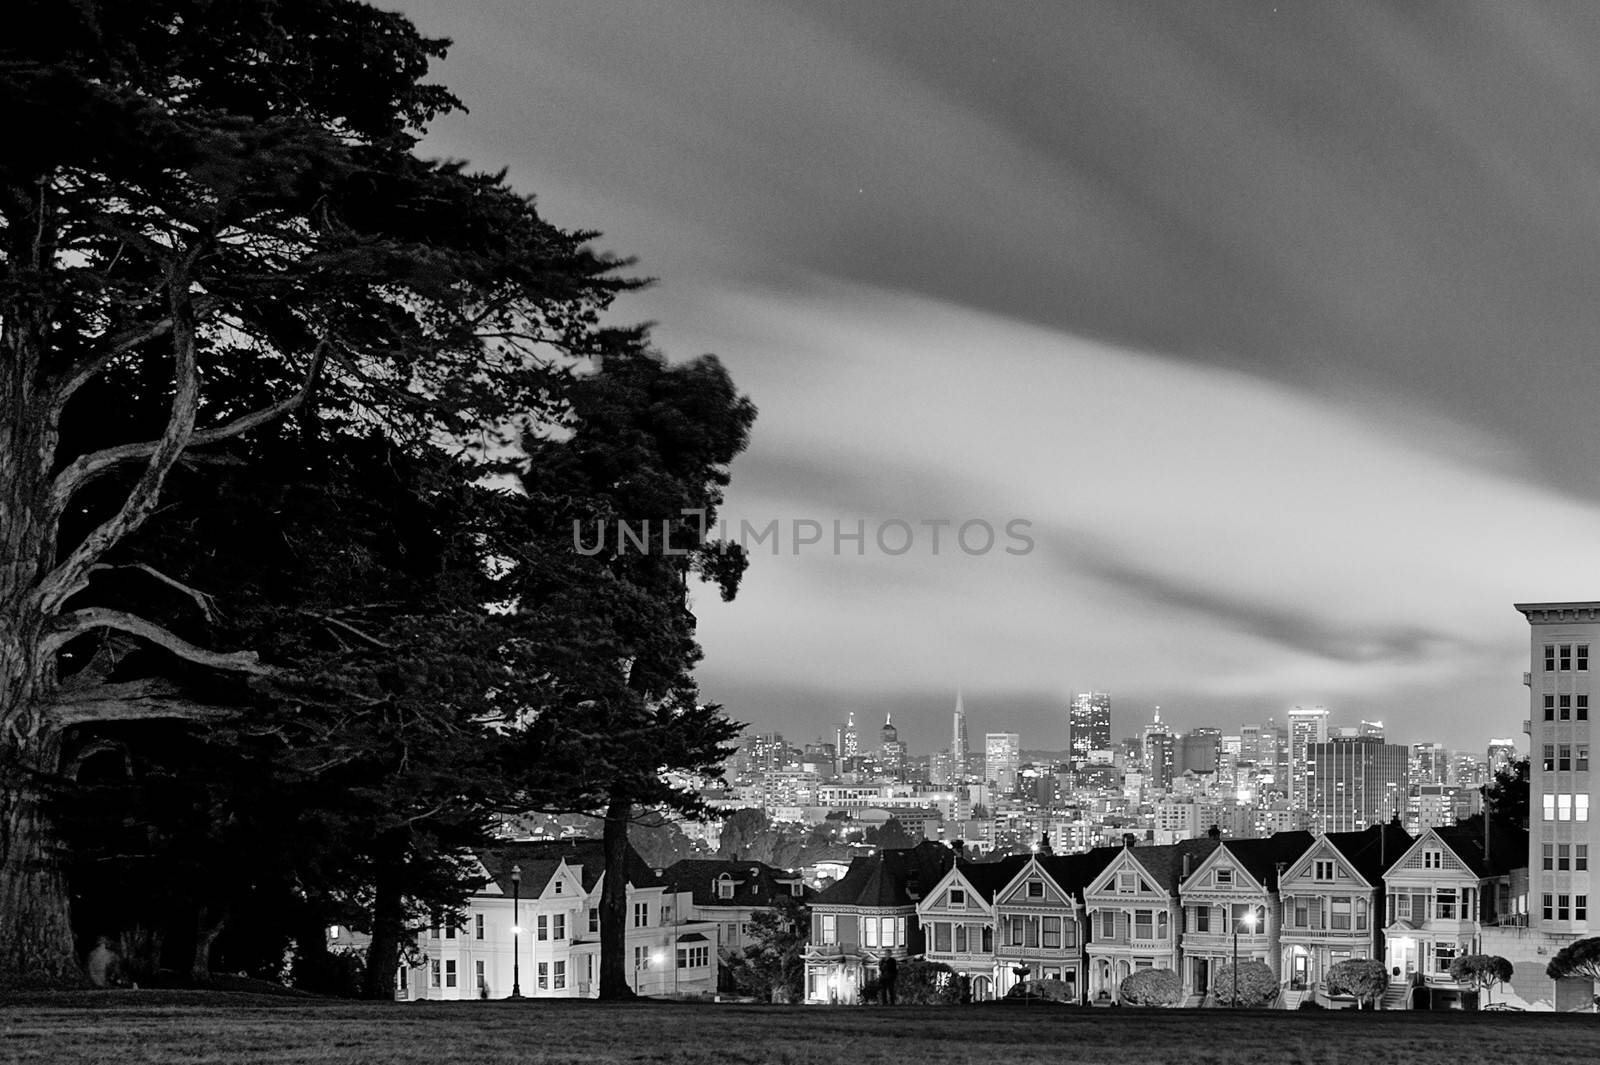 Black and white scenic view of San Francisco skyline looking from Alamo Square Park over Victorian houses on Steiner street, California, U.S.A.